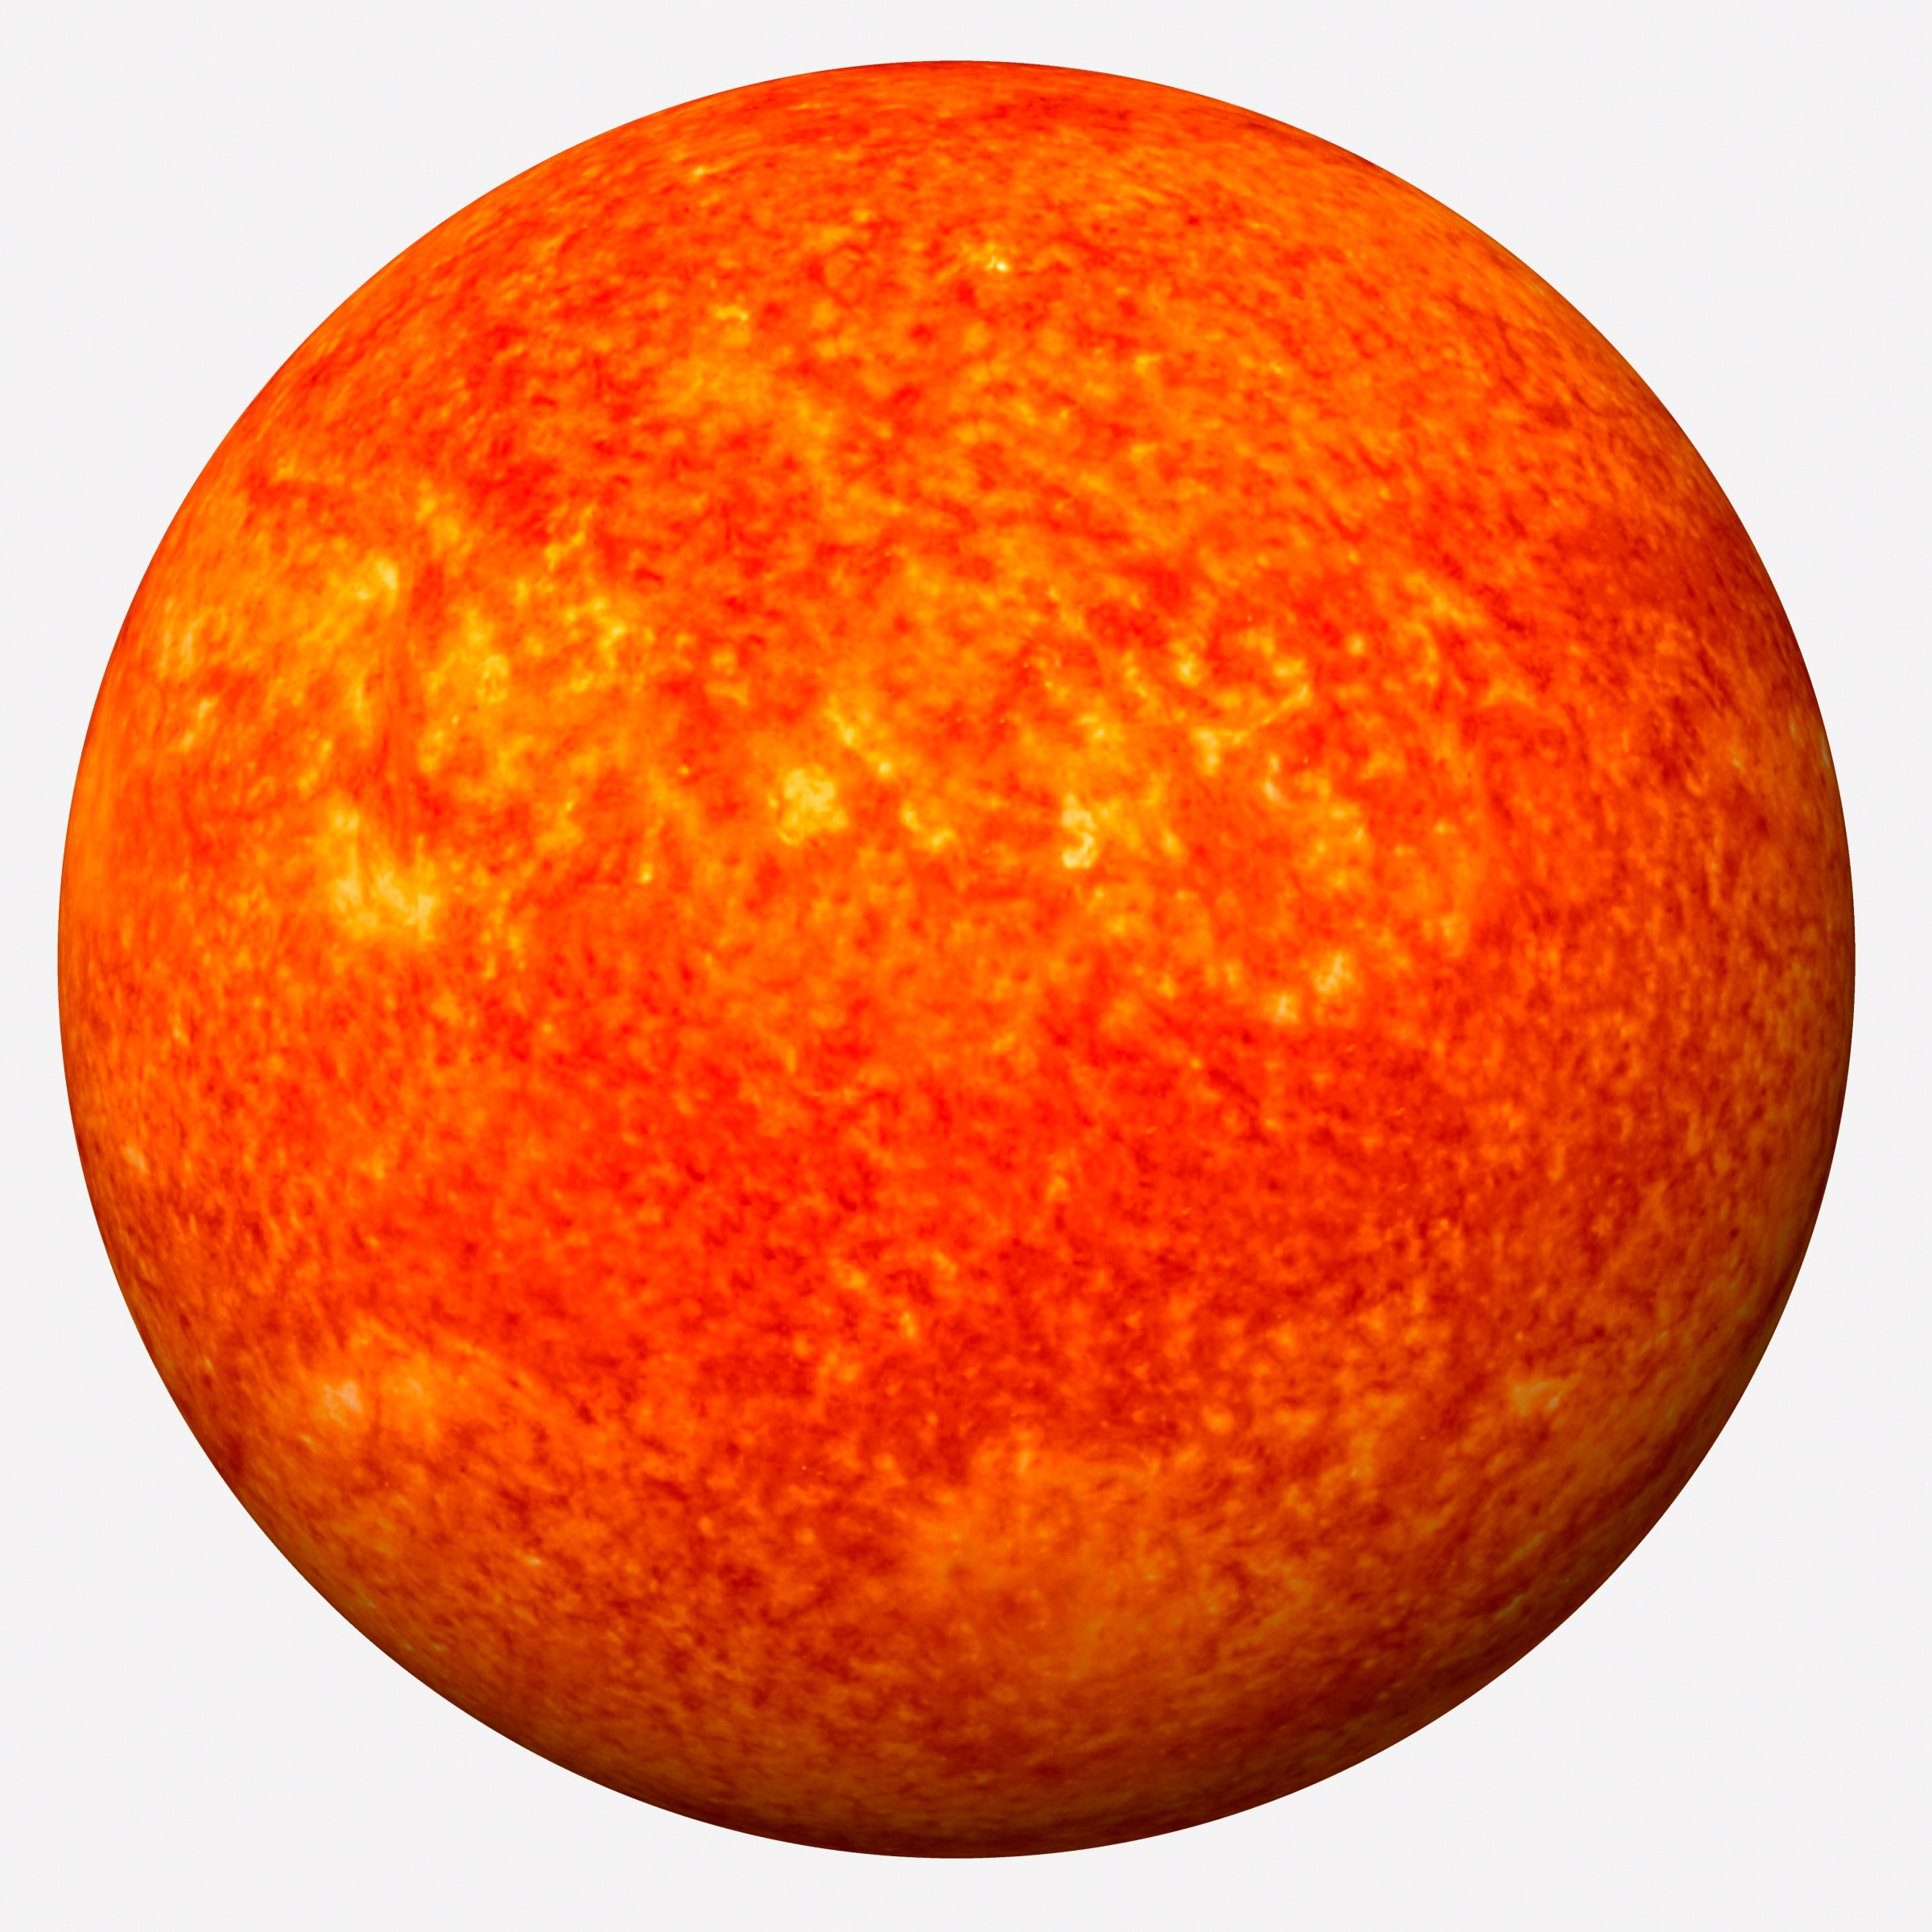 There's a prize hidden inside this red giant